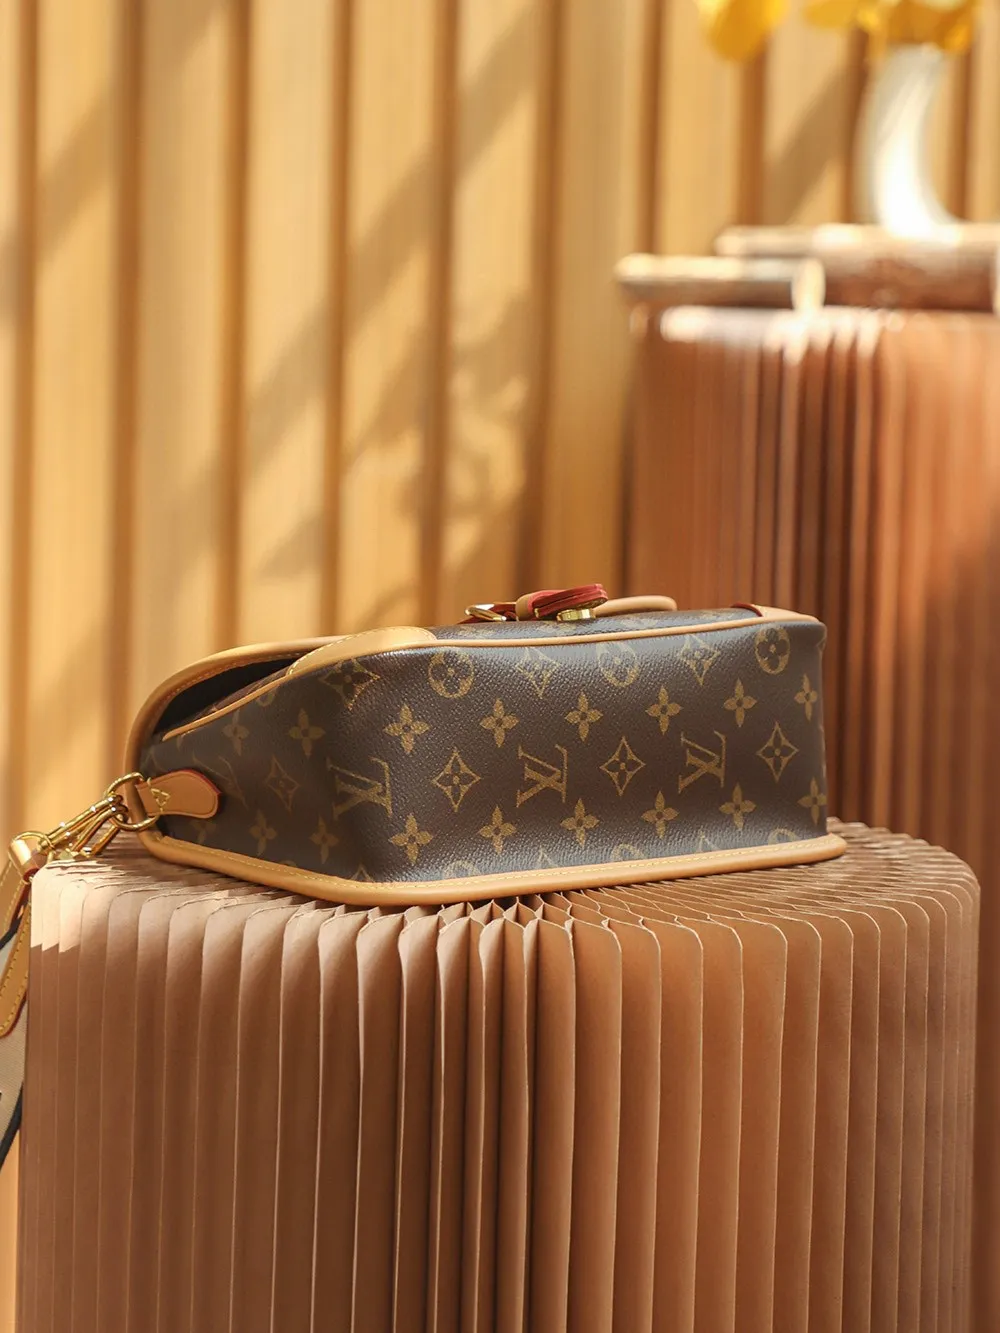 Louis Vuitton Nano Speedy Bag Review, Gallery posted by Harley Robinson